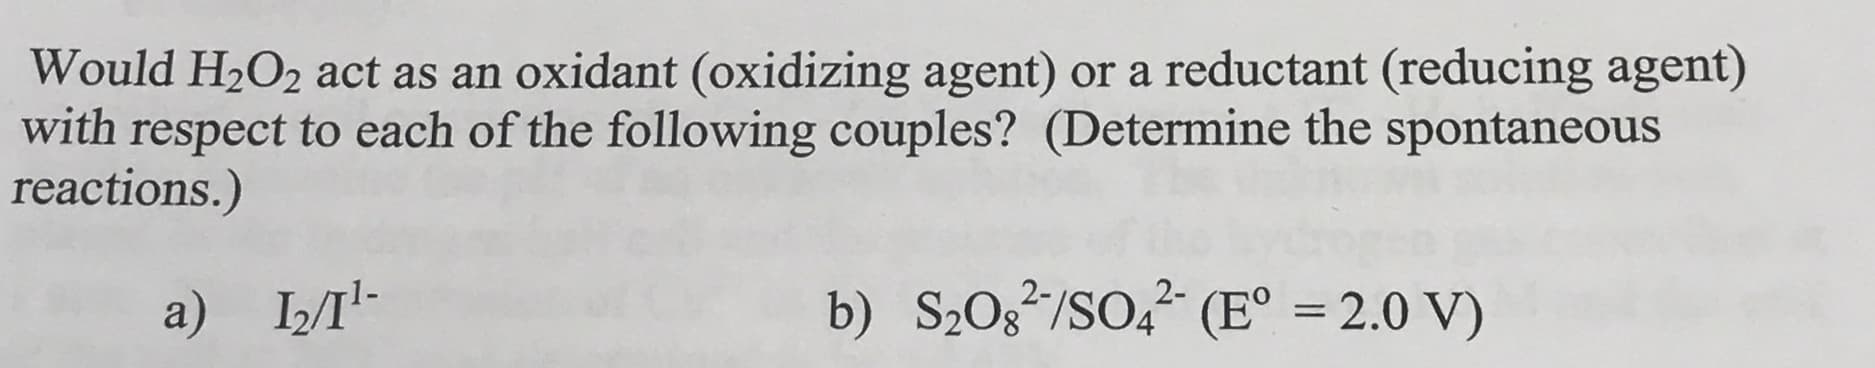 Would H2O2 act as an oxidant (oxidizing agent) or a reductant (reducing agent)
with respect to each of the following couples? (Determine the spontaneous
reactions.)
а) IЛ-
b) S2Og*/SO, (E° = 2.0 V)
